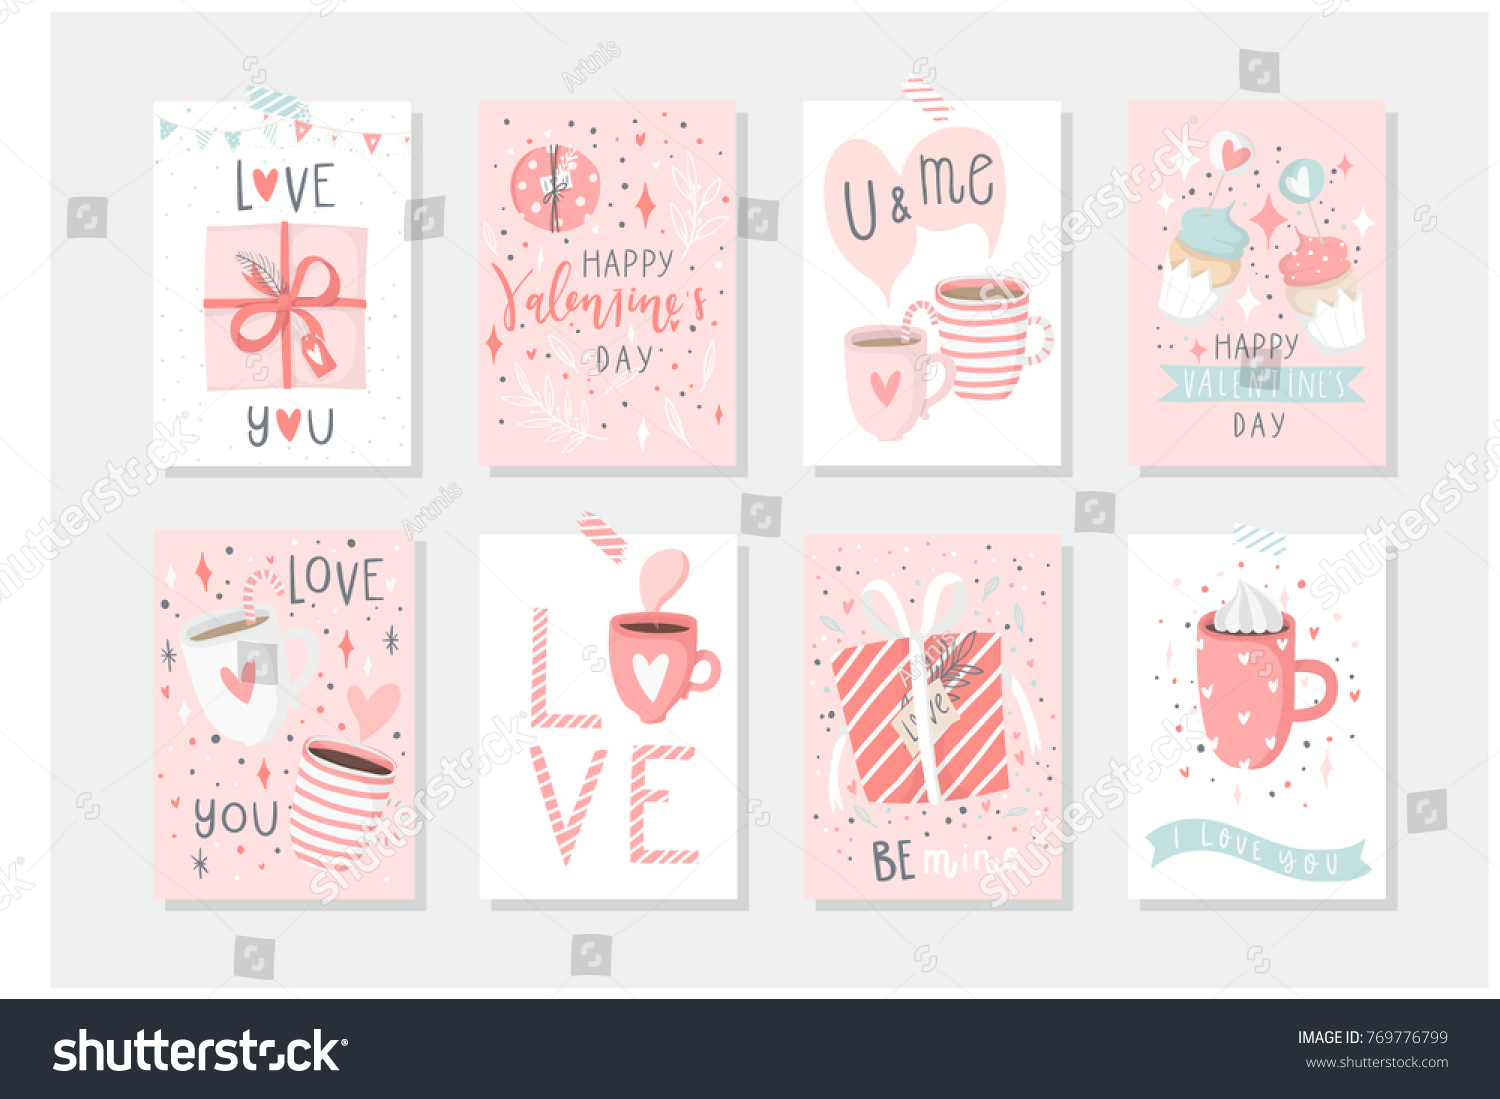 Set of 8 cute gift romantic postcards with penguins Gifts, hearts, cups and magic Vector printable collection of pink Valentine's Day card, invitation, poster in gentle colors template design  #769776799